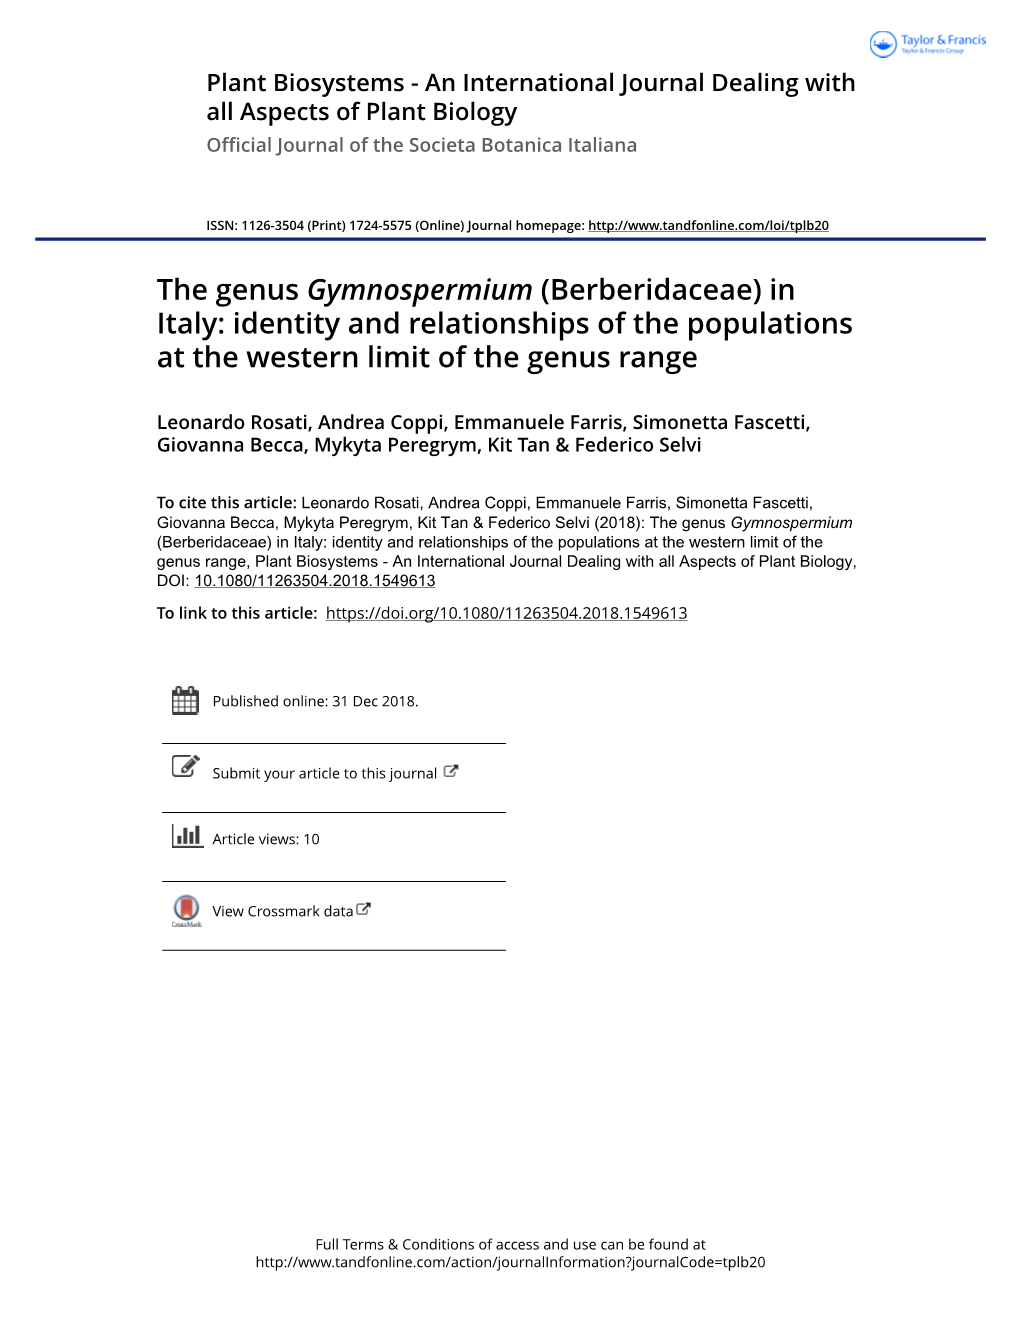 The Genus Gymnospermium (Berberidaceae) in Italy: Identity and Relationships of the Populations at the Western Limit of the Genus Range